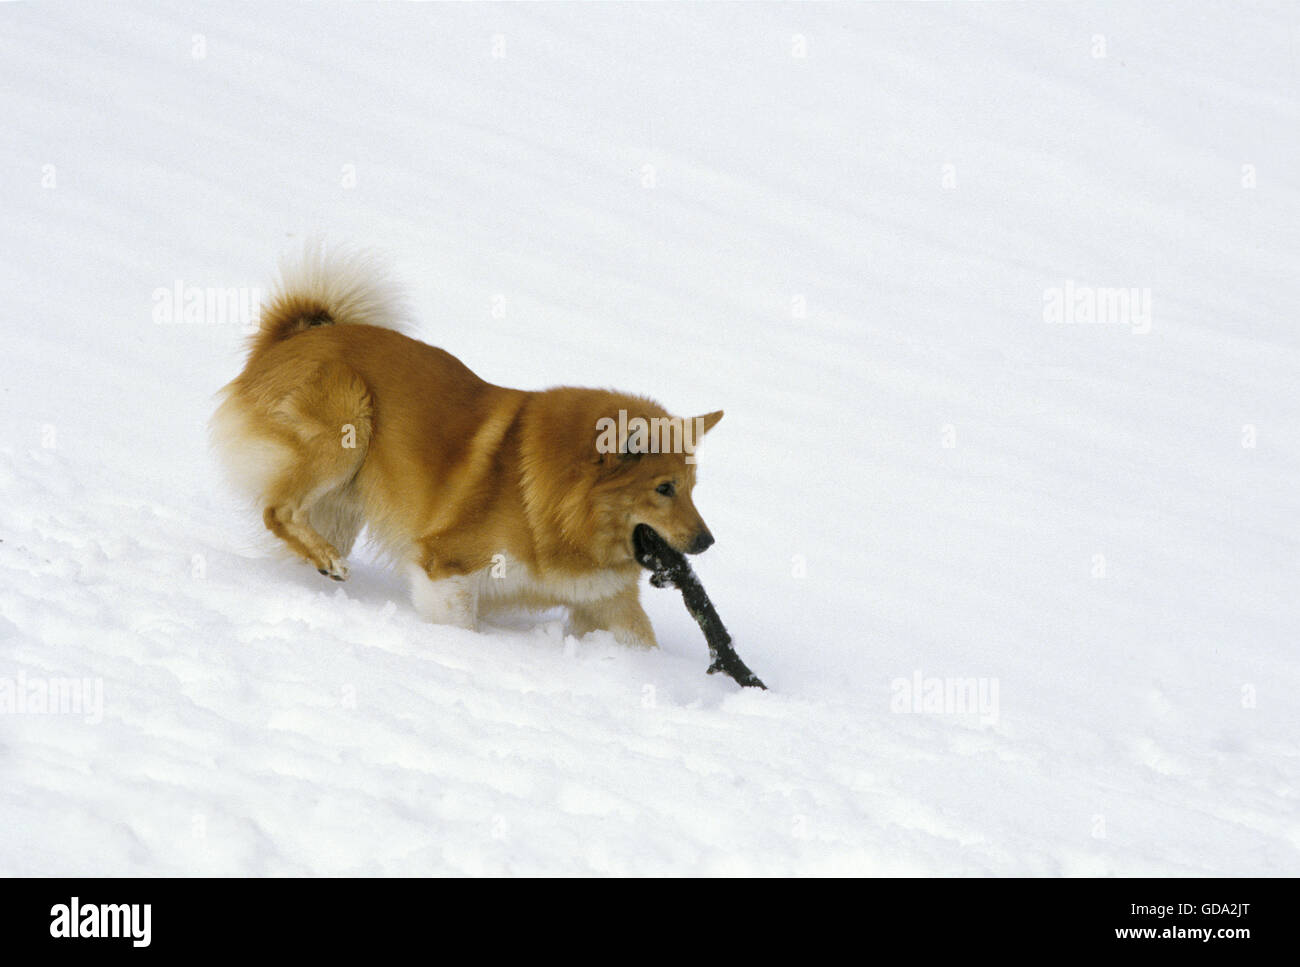 Iceland Dog or Icelandic Sheepdog playing in Snow with a Stick of Wood Stock Photo